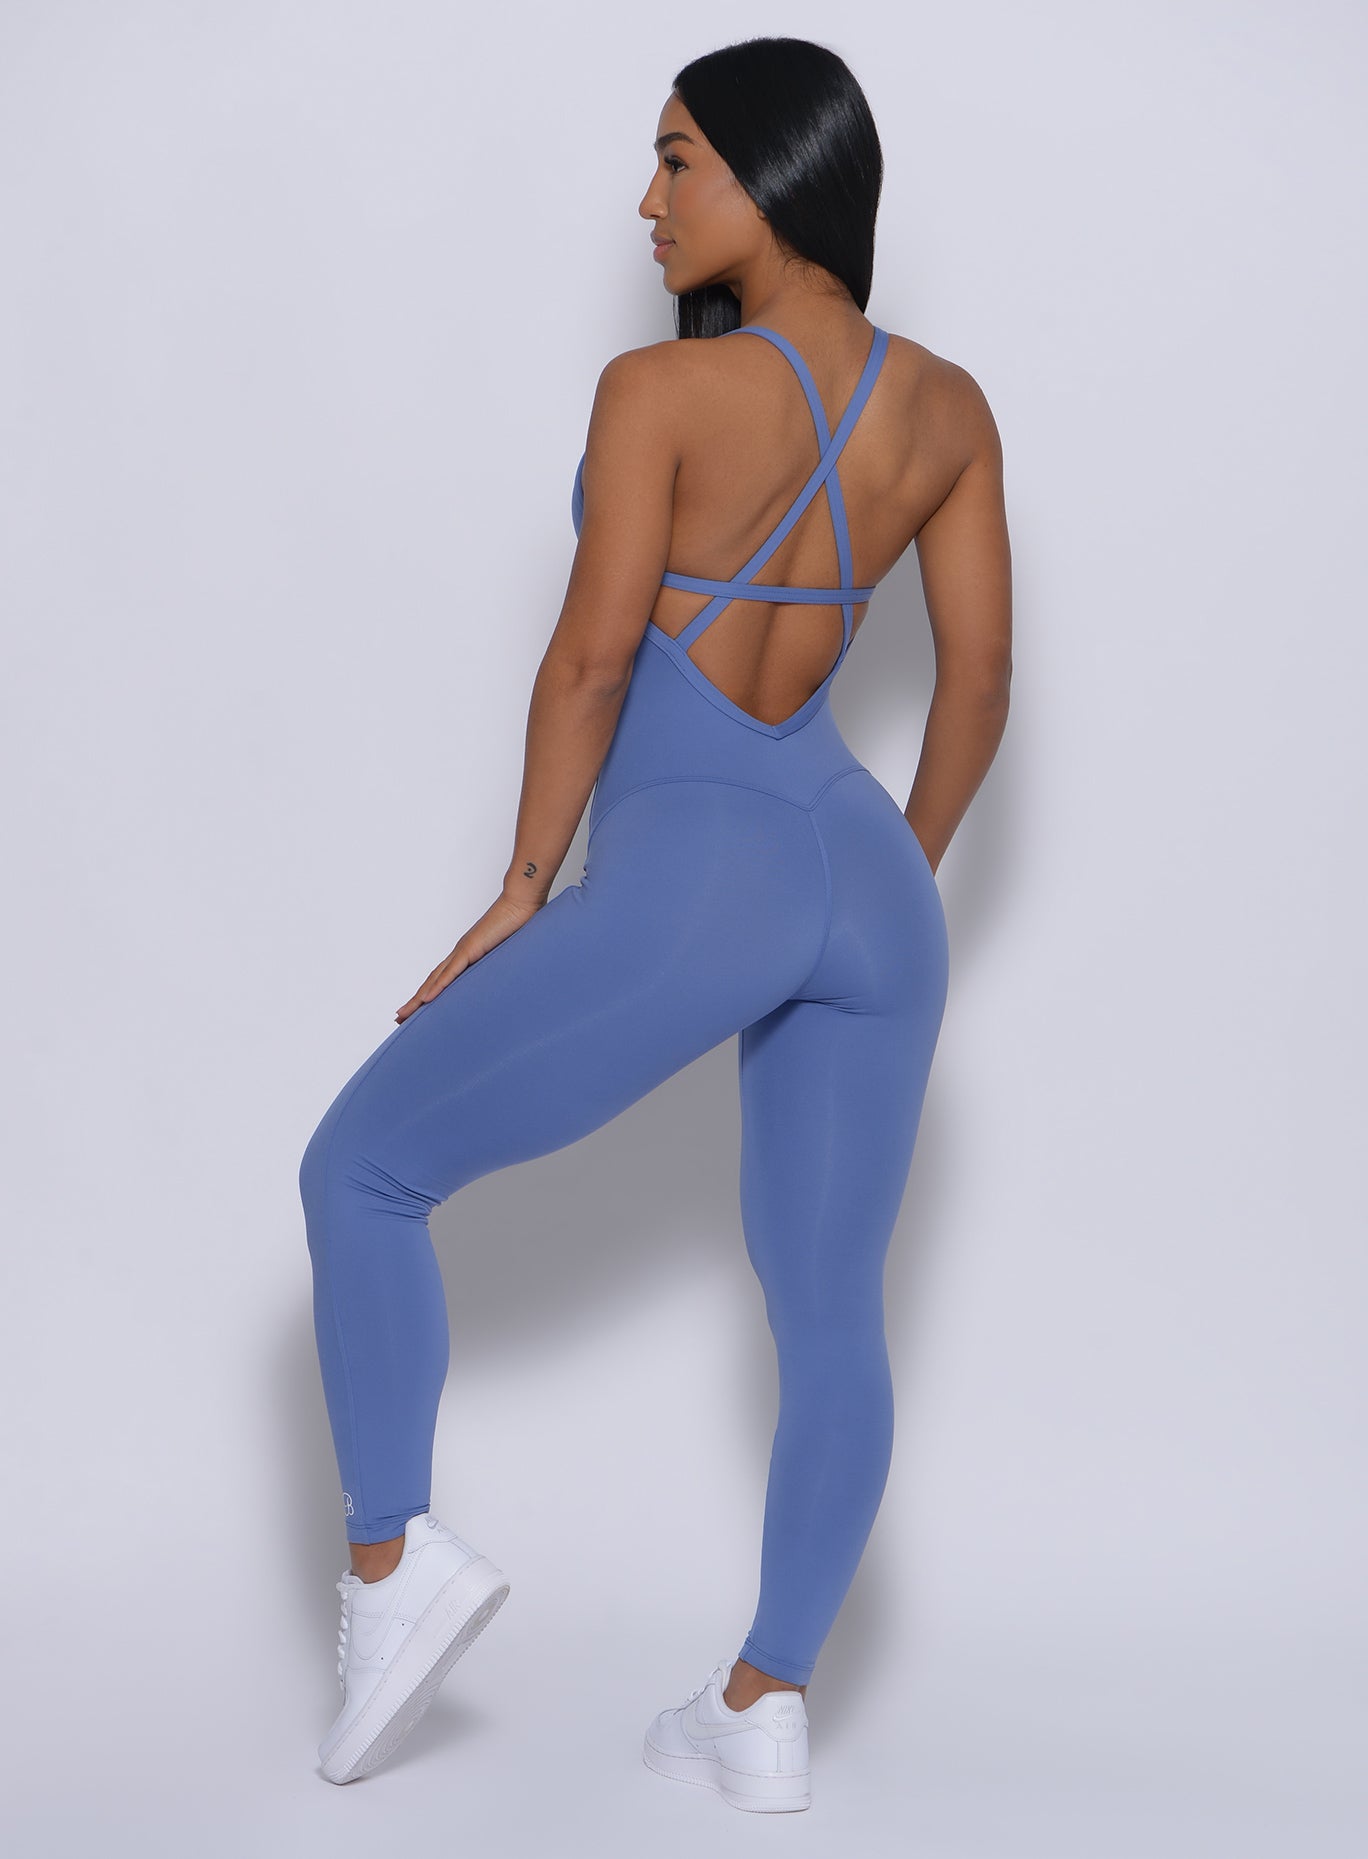 Back profile view of a model in our sculpted bodysuit in denim blue color